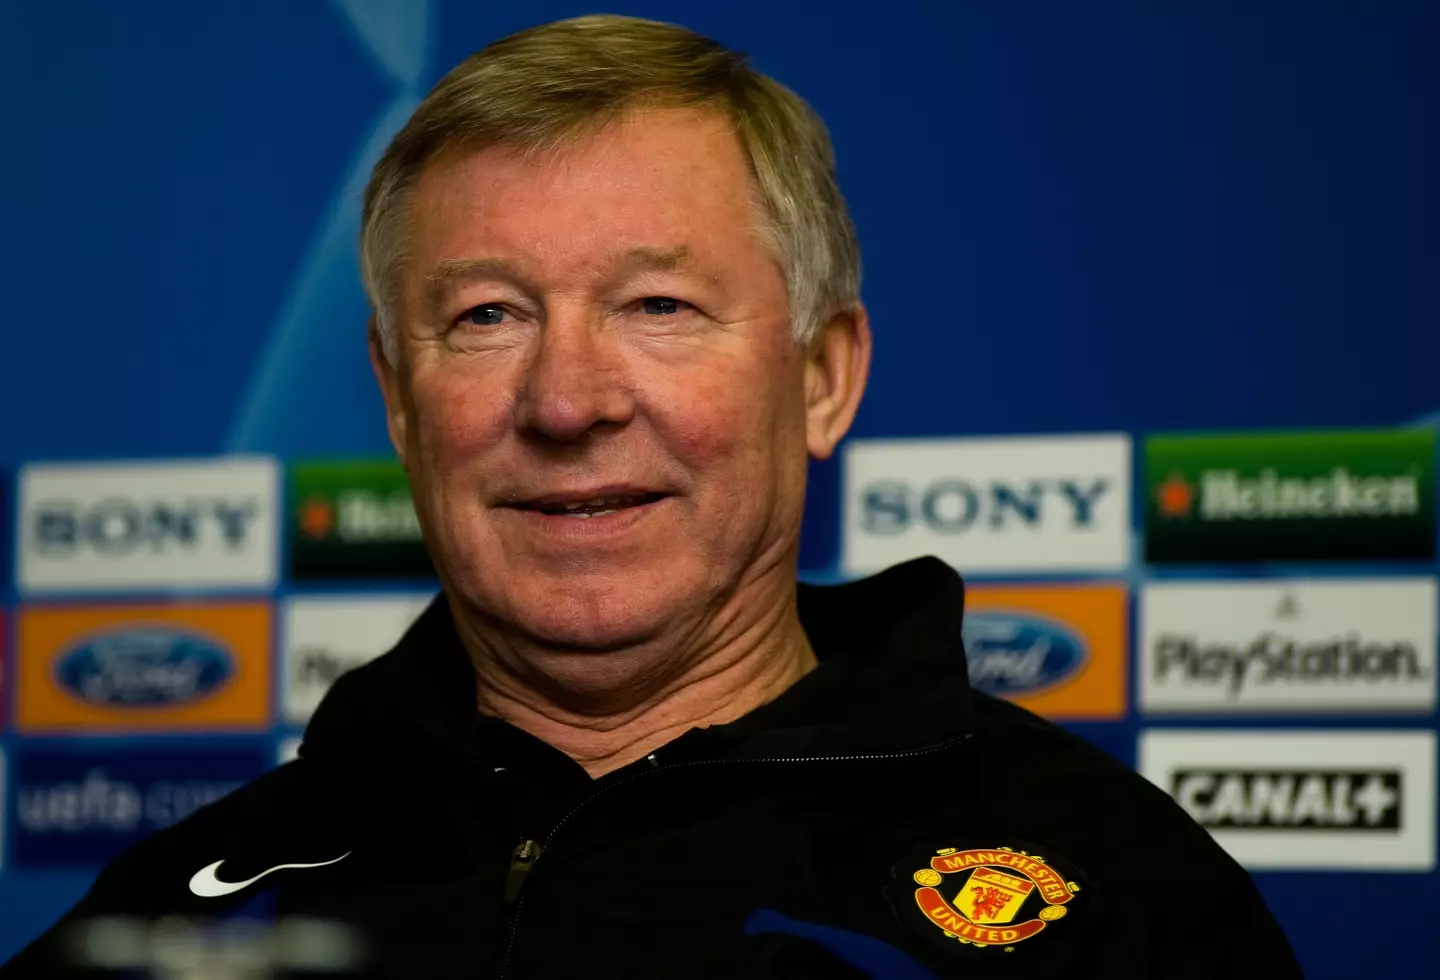 Ferguson was unhappy with Eriksson picking Rooney for England duty (Image: Alamy)